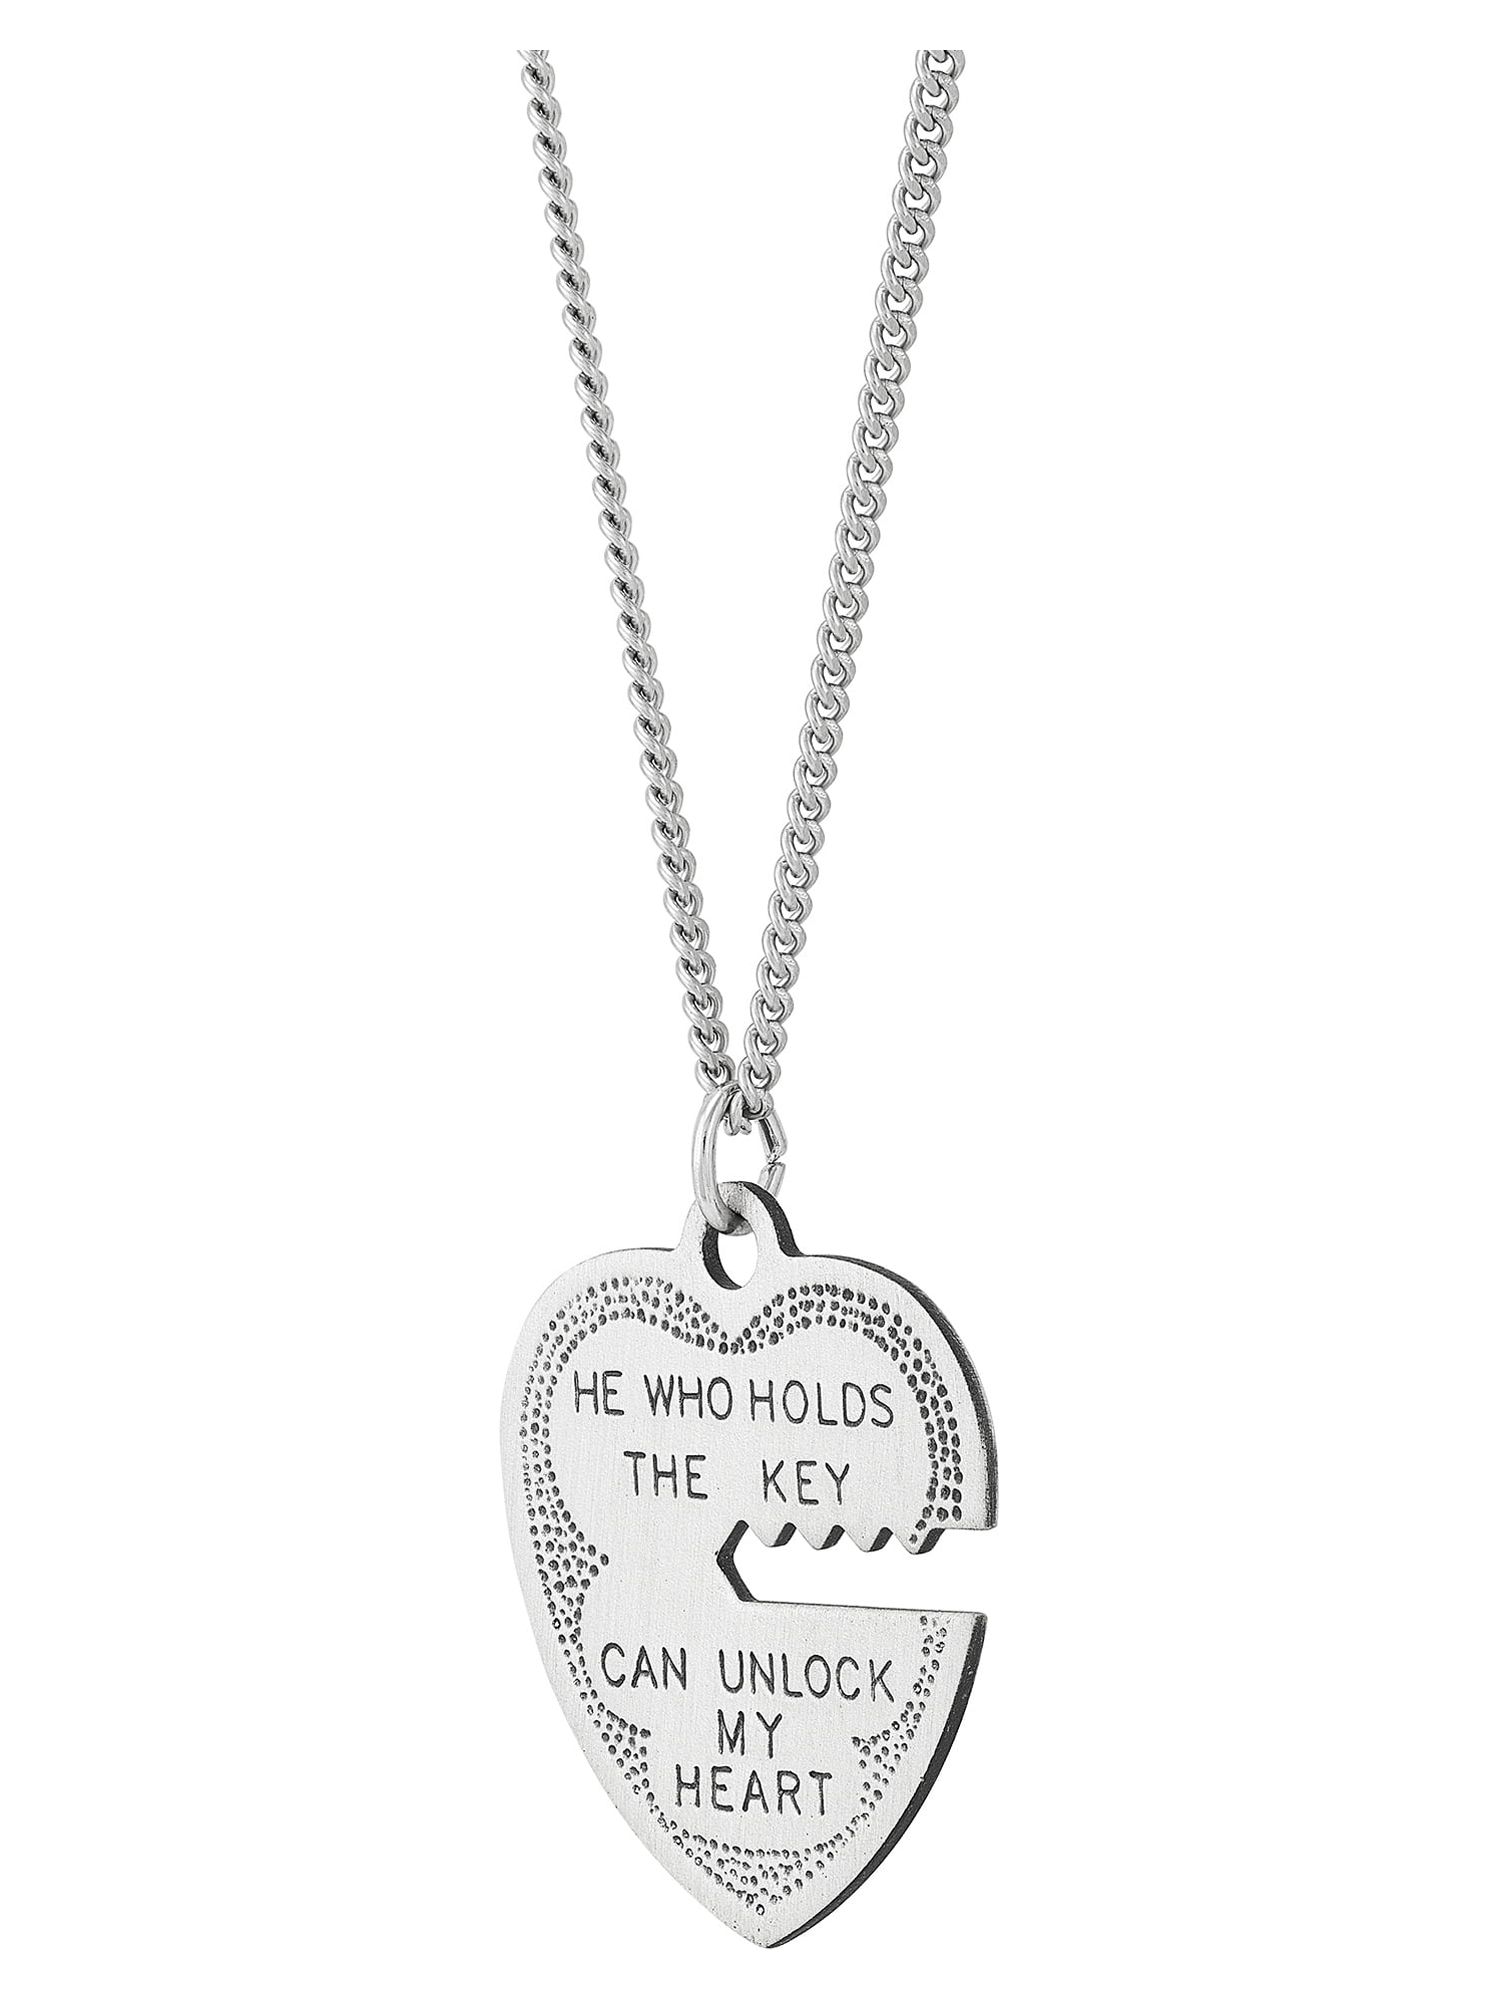 Brilliance Fine Jewelry Sterling Silver Breakable Heart Key Pendant Necklace Set,18" - image 4 of 11